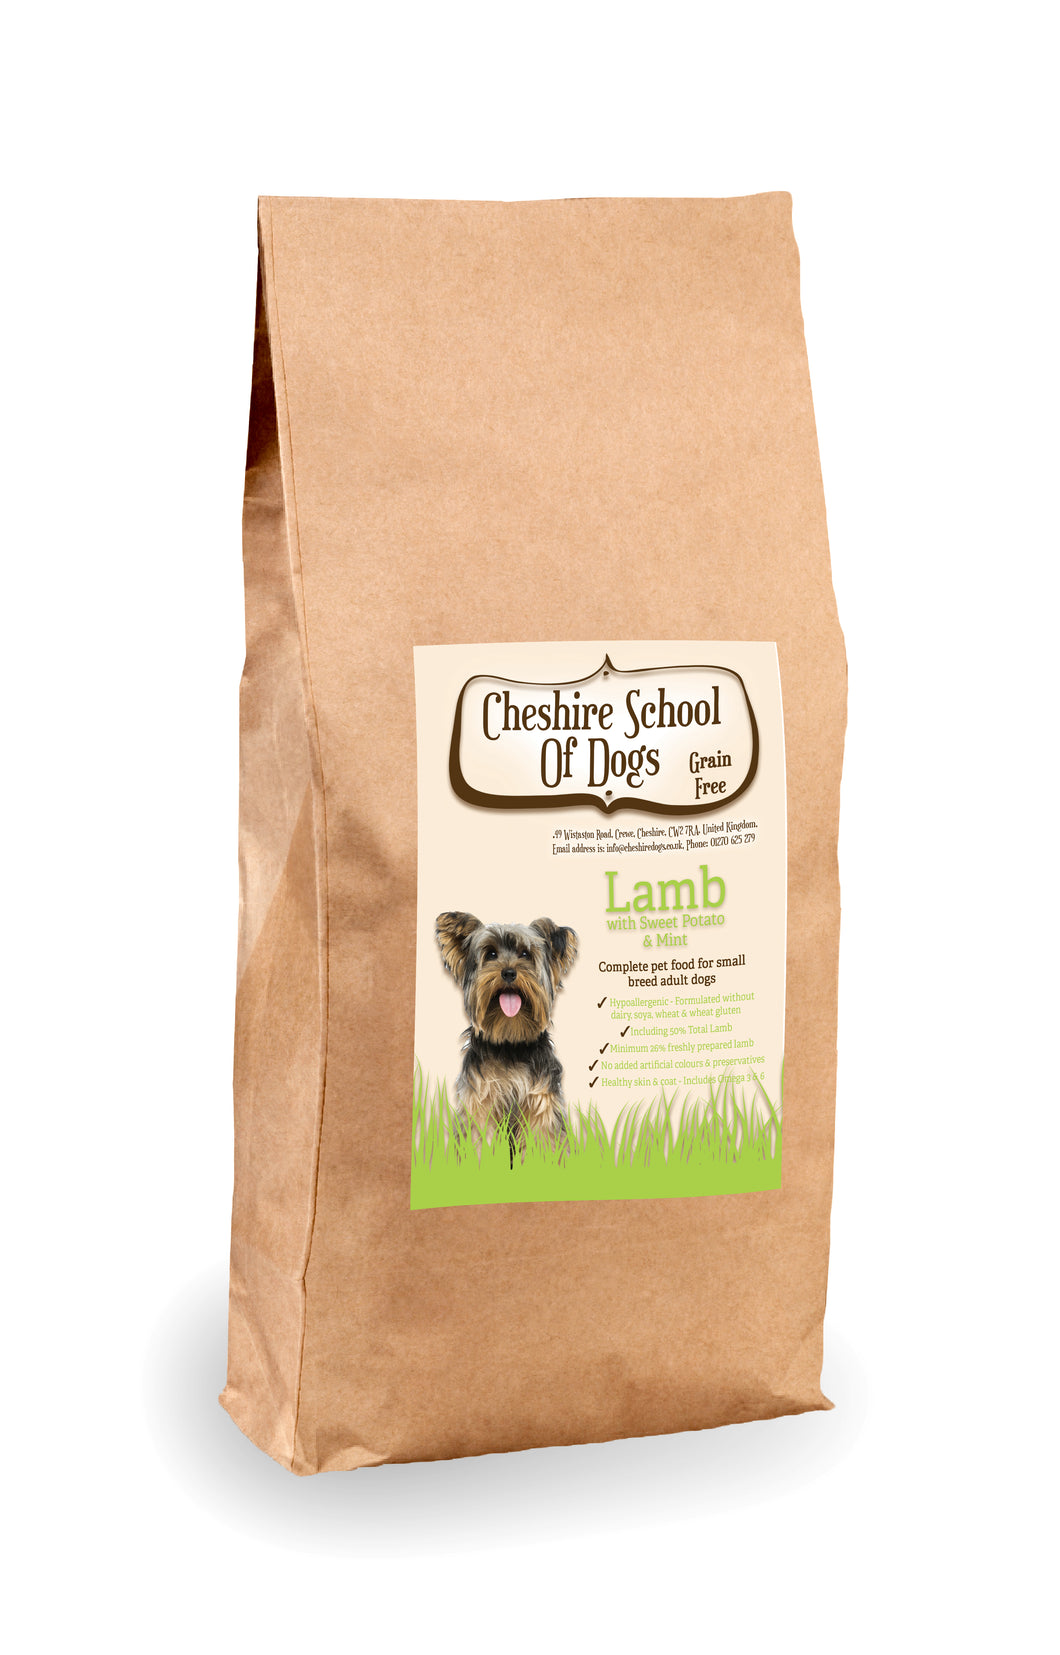 Grain Free - Lamb, Sweet Potato & Mint Complete Dog Food For Small Adult Dogs